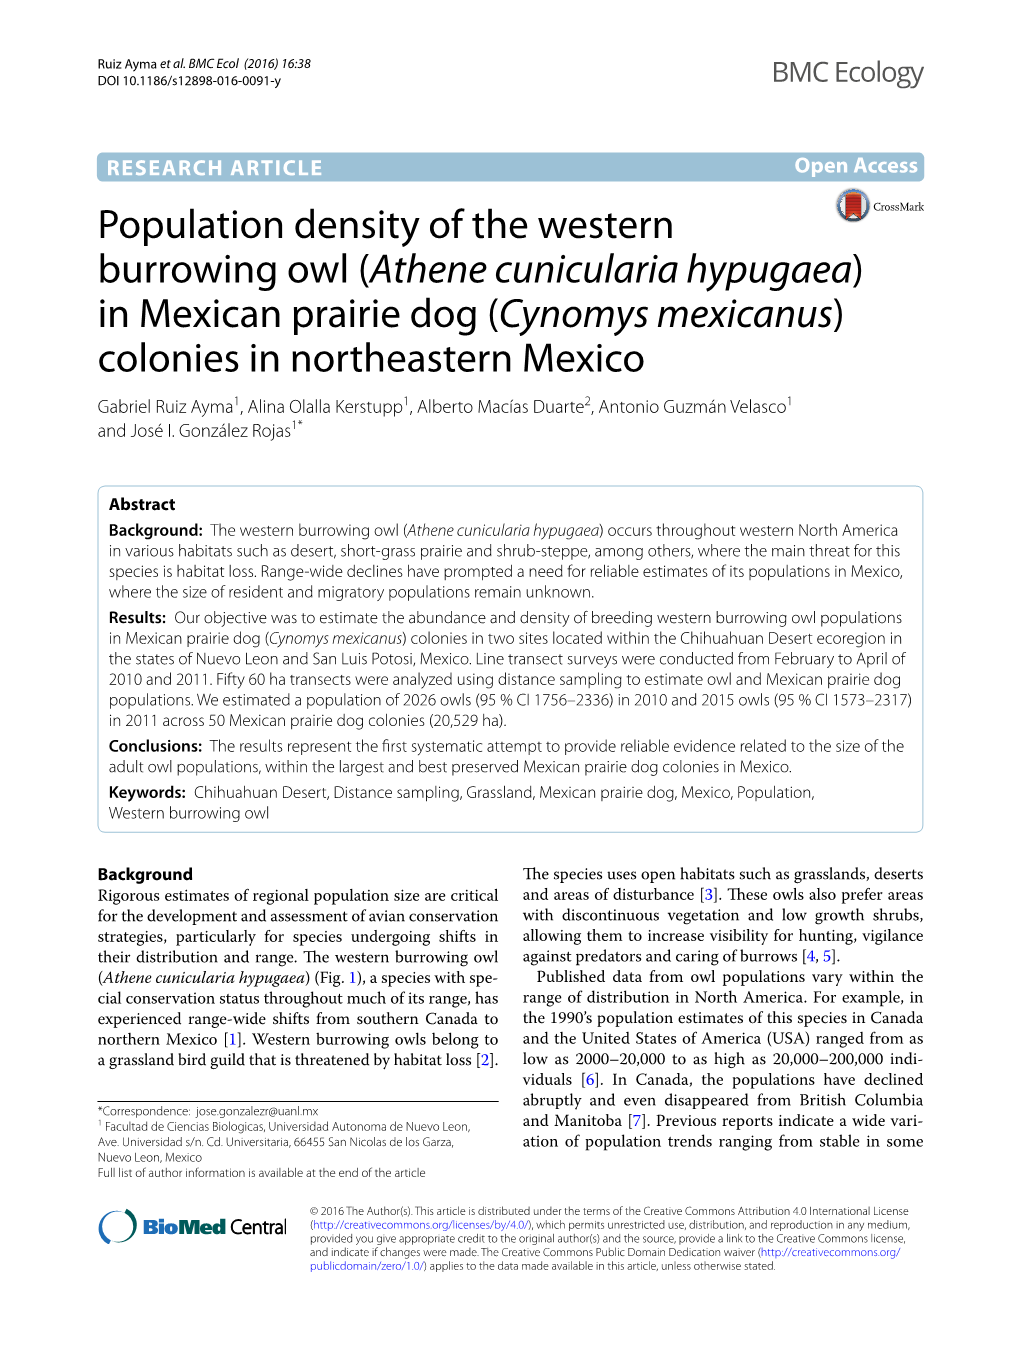 Population Density of the Western Burrowing Owl (Athene Cunicularia Hypugaea) in Mexican Prairie Dog (Cynomys Mexicanus) Colonie